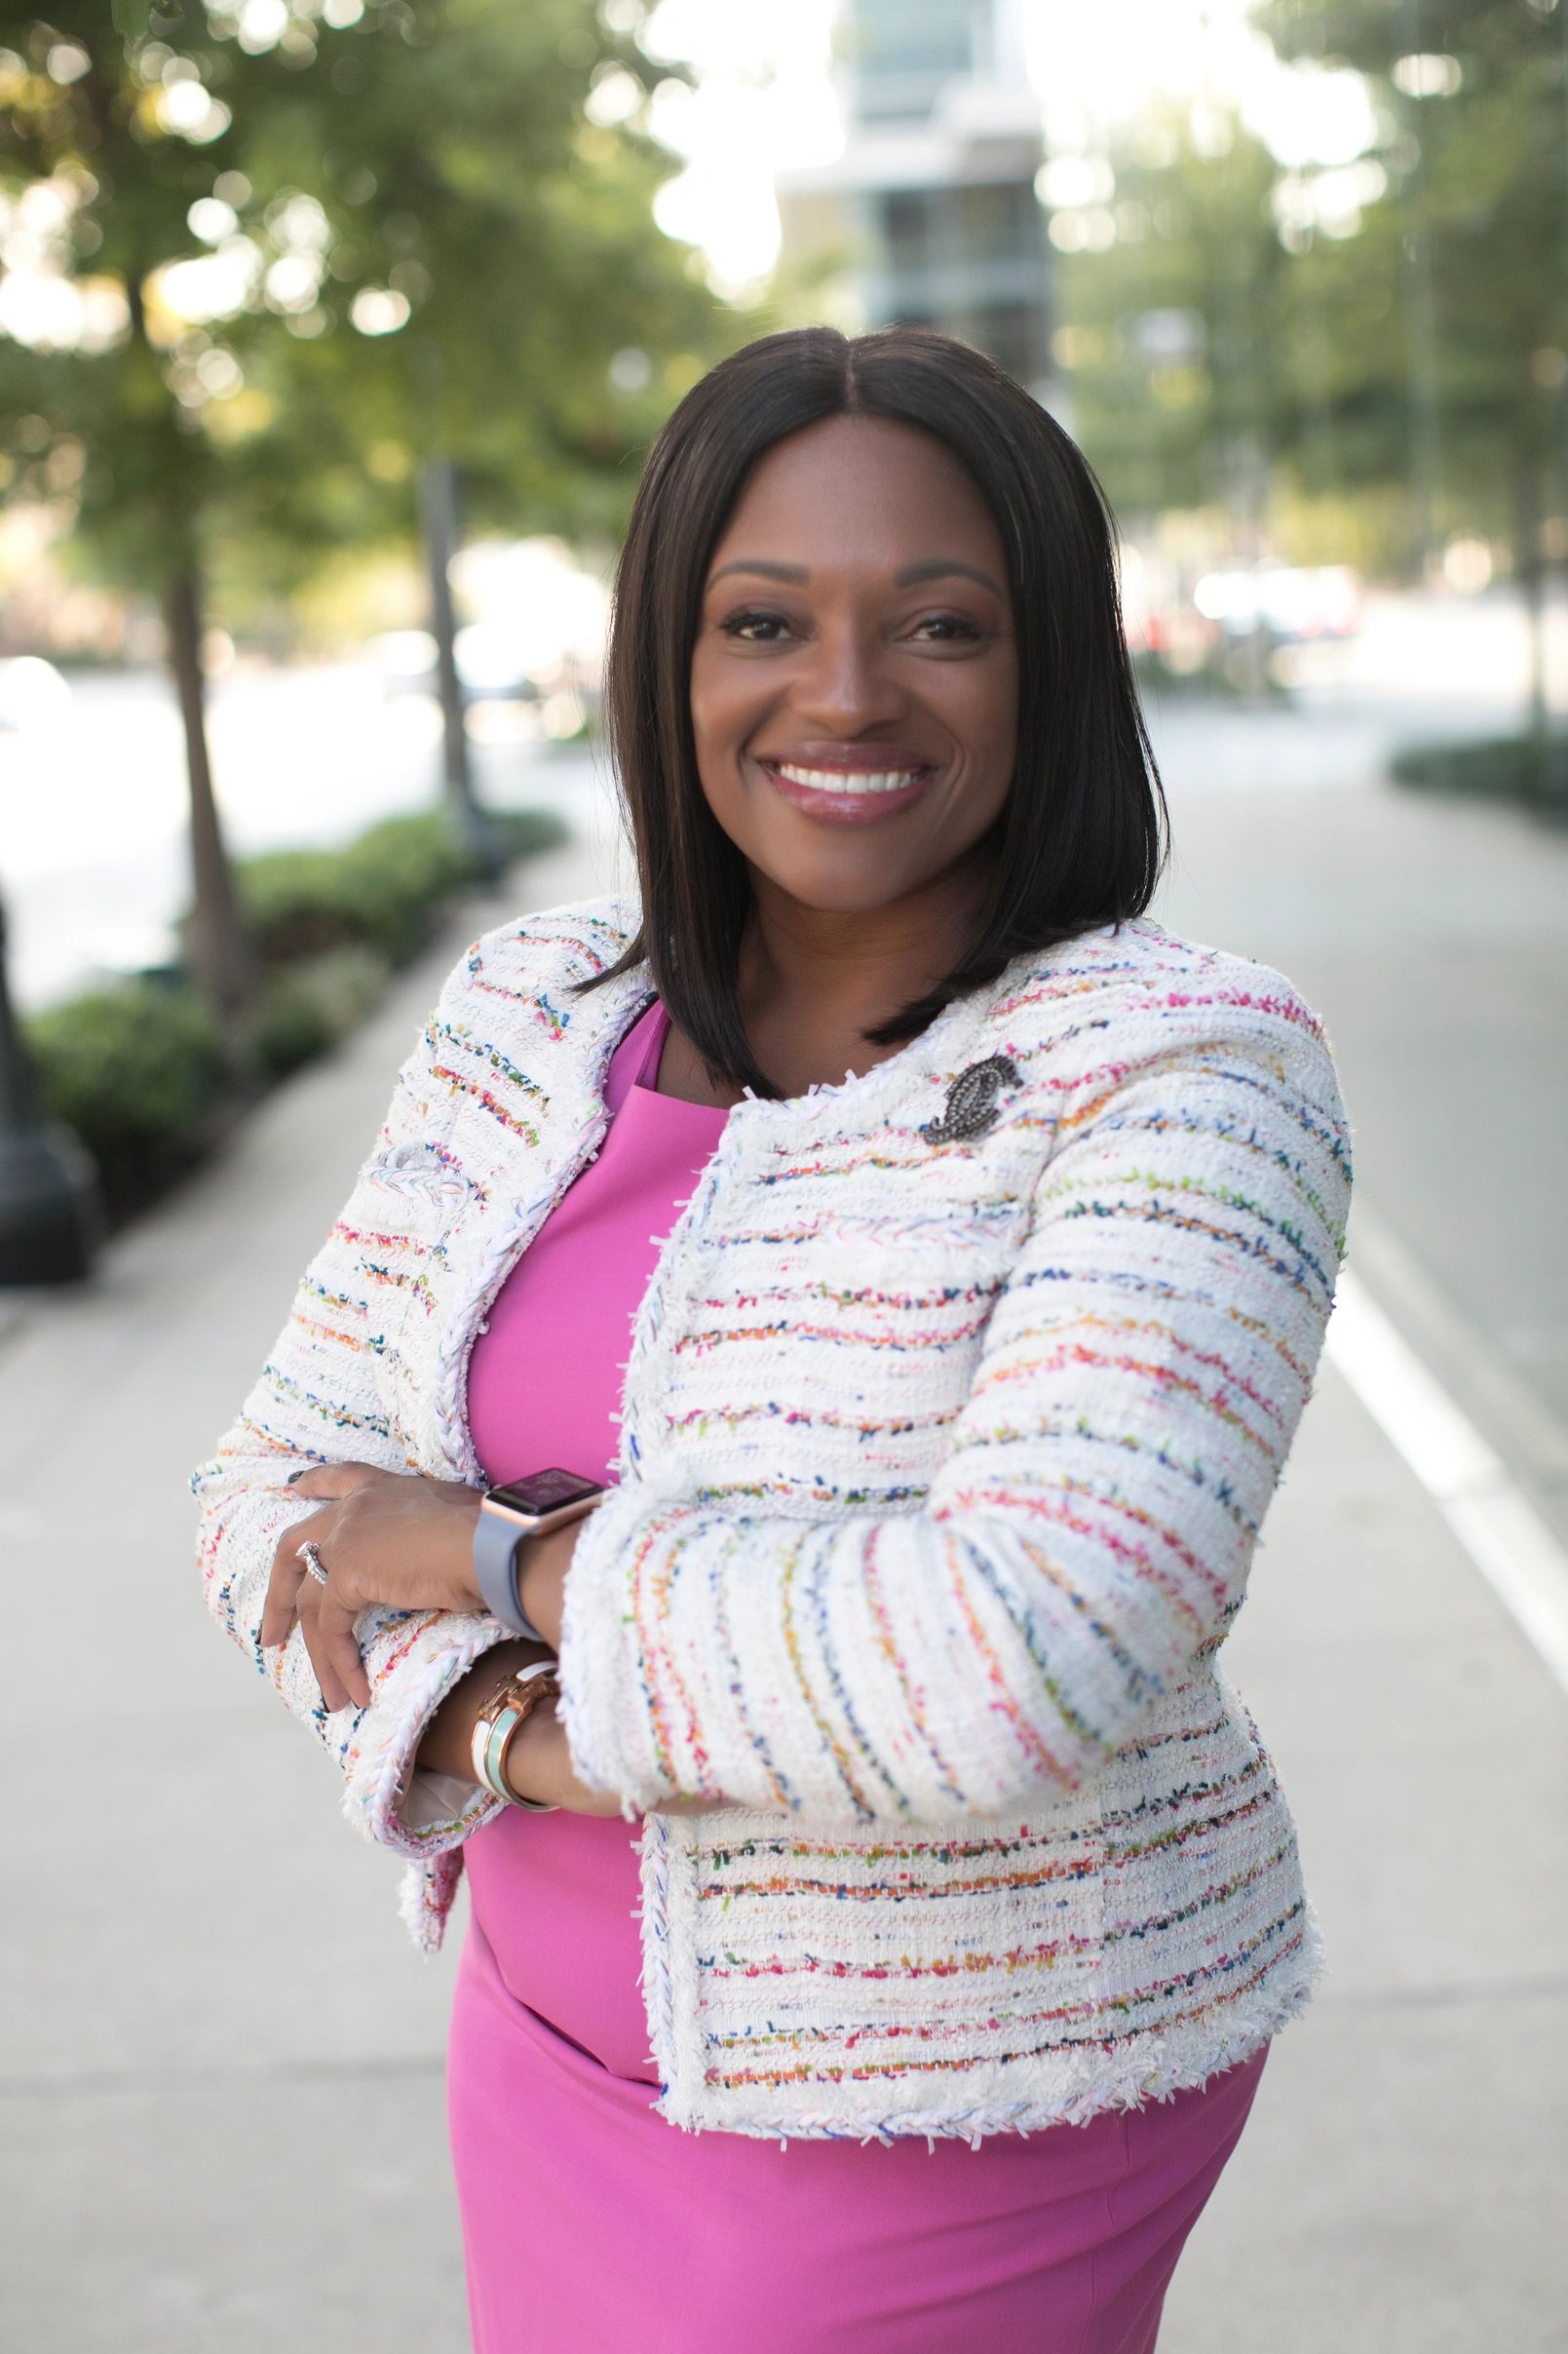 Dr Carisa Hines Moore 
CEO & Founder
Freeman Moore Medical Consultants